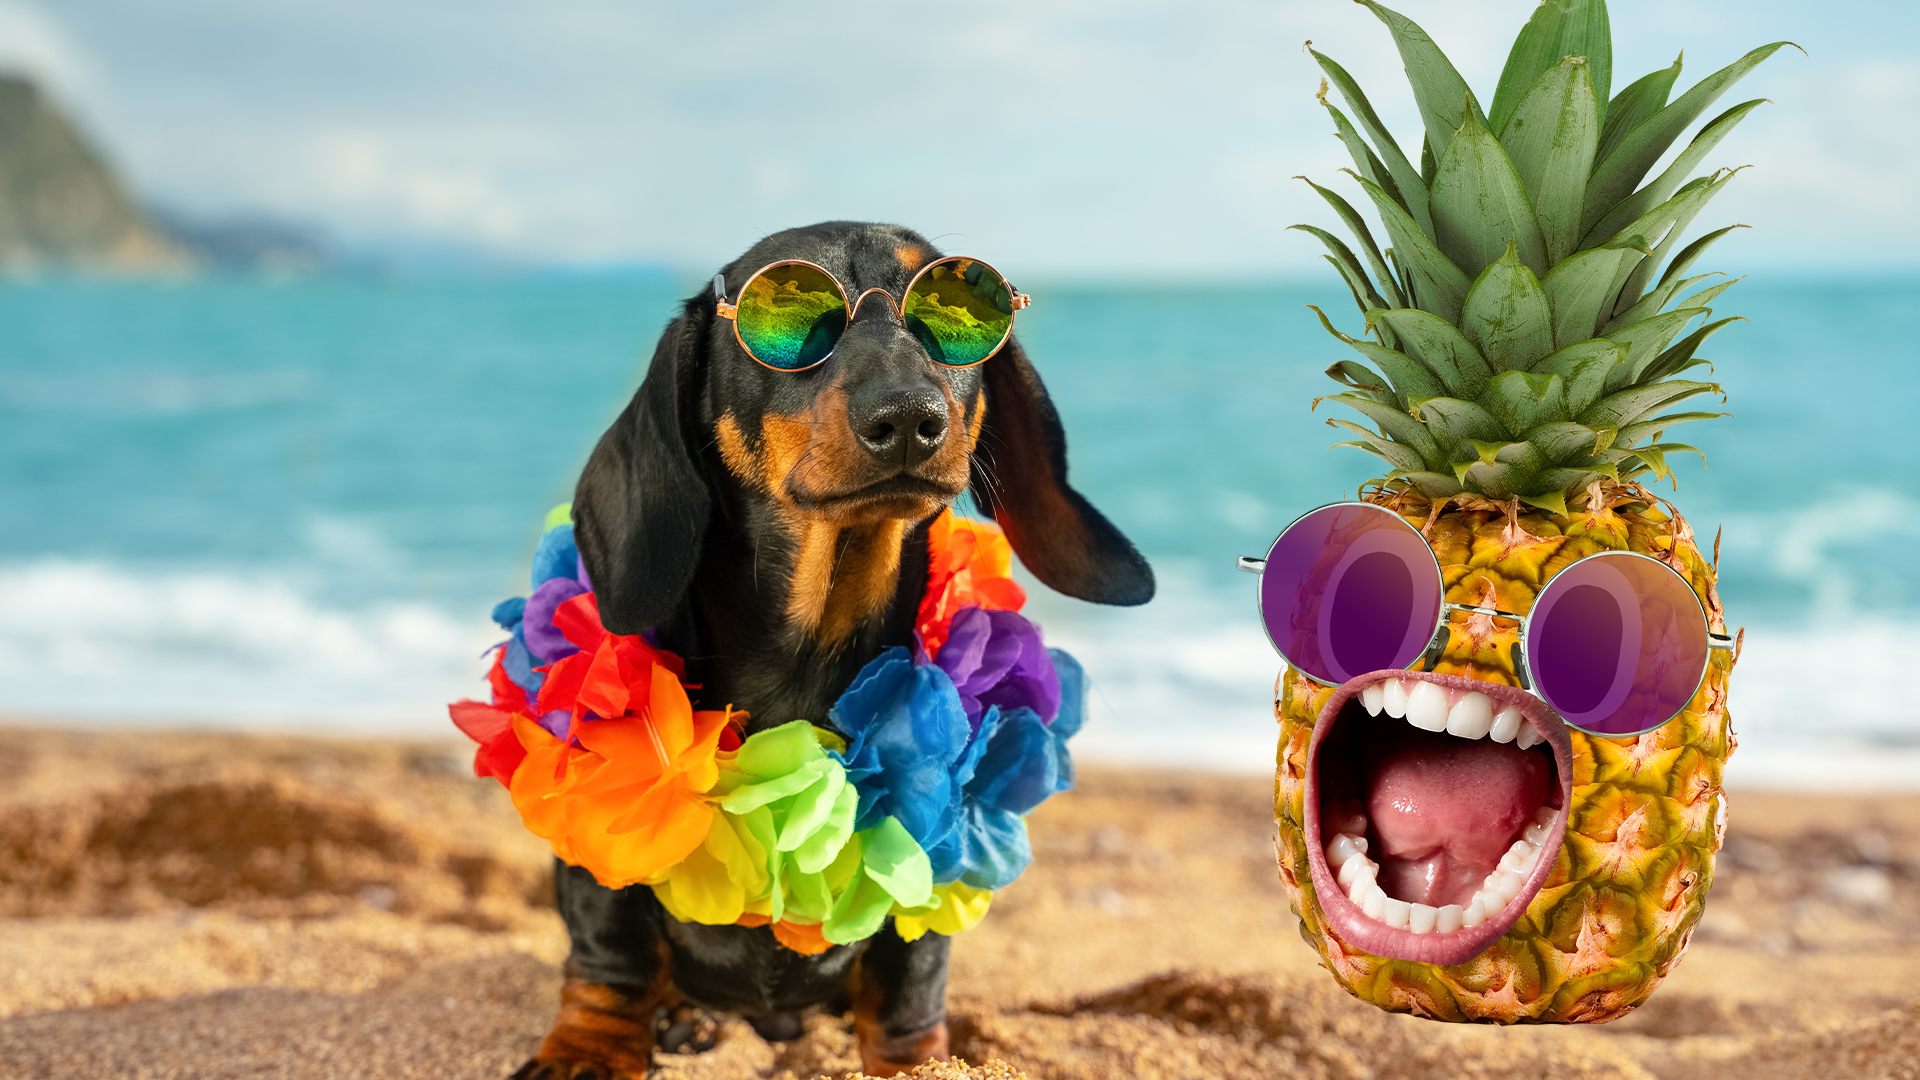 Sausage dog in sunglasses on beach with screaming pineapple  